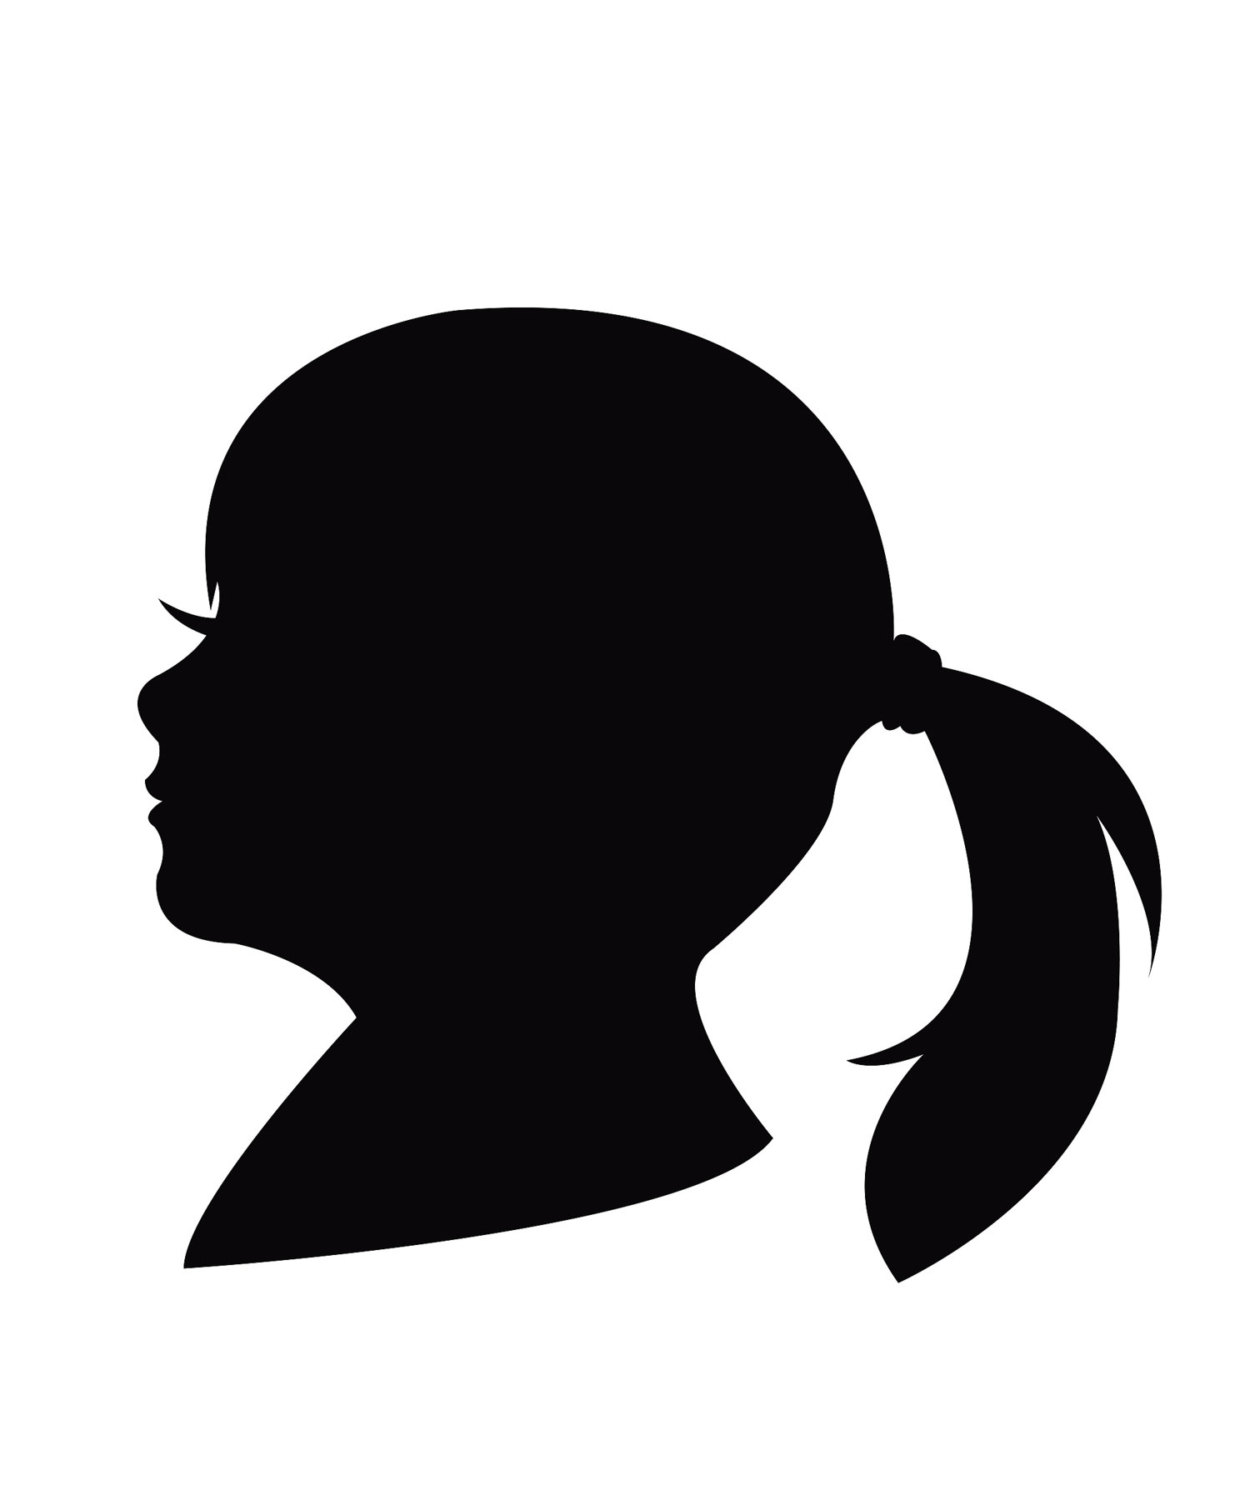 Images For > Female Head Silhouette Profile